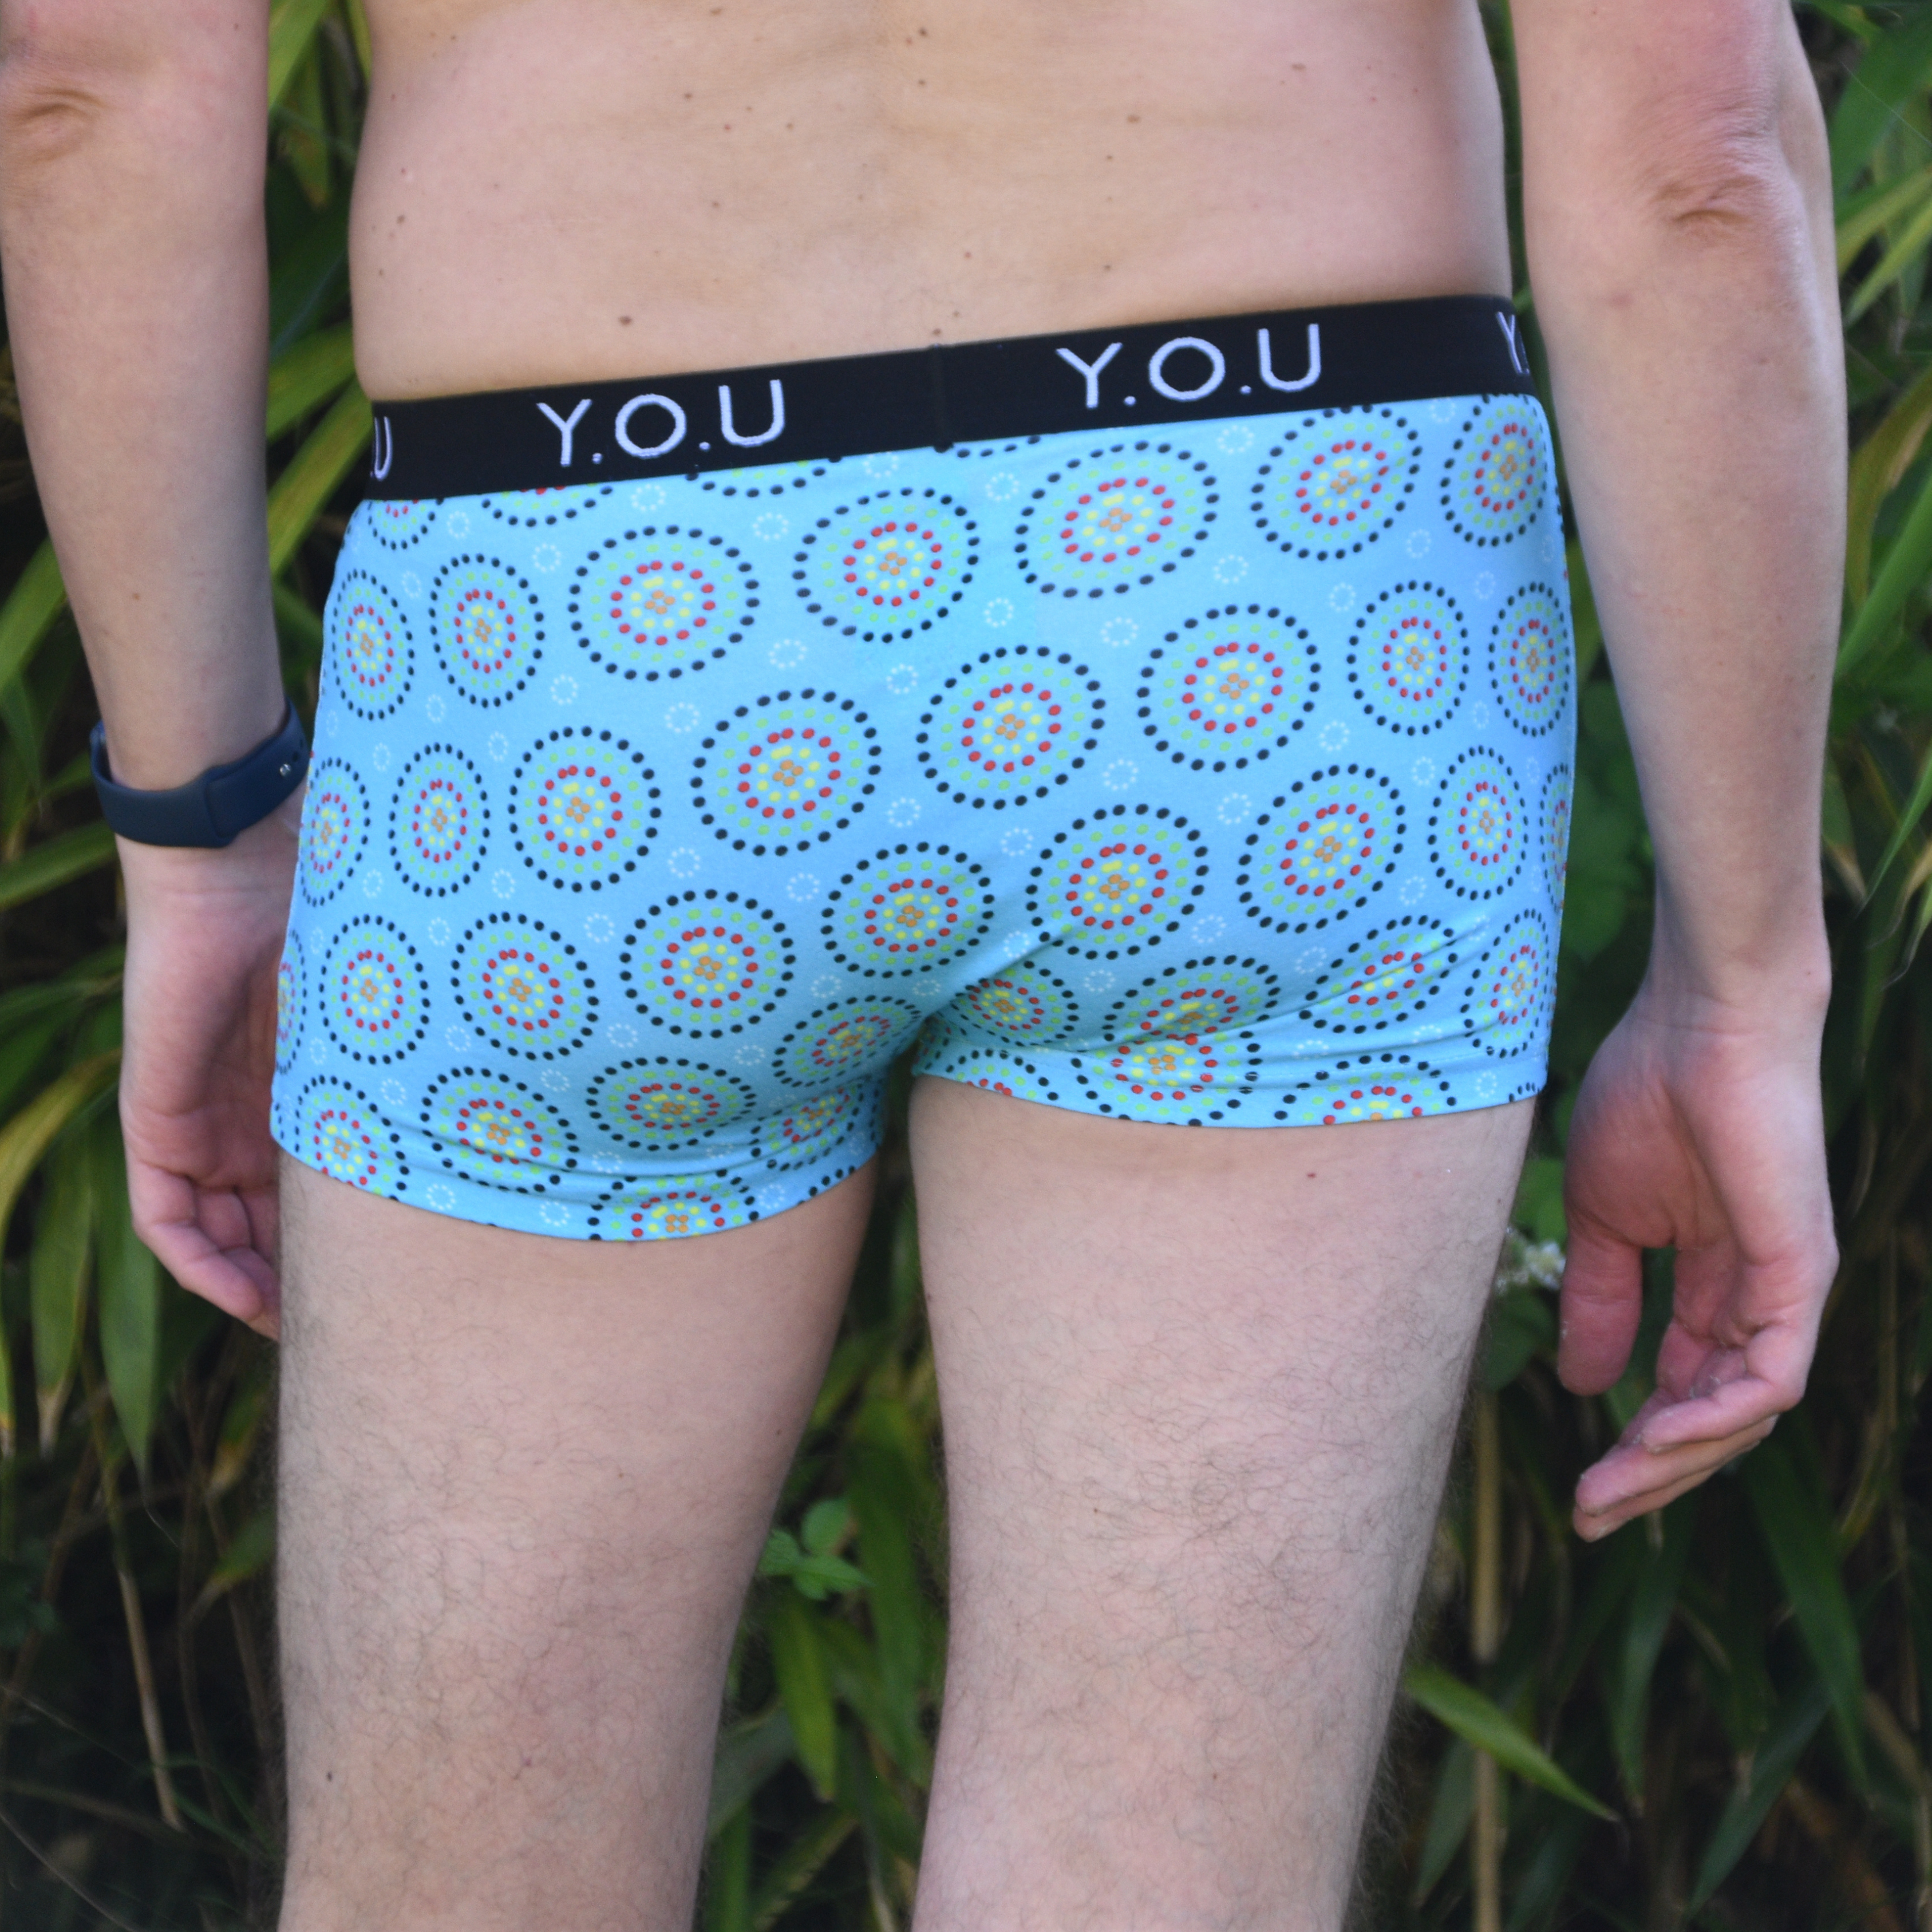 A person stands outdoors, facing away from the camera, wearing light blue men’s hipster trunks with a colourful circular pattern. The waistband reads "Y.O.U." in white letters. The person is near green plants and is wearing a dark wristband on their left wrist.